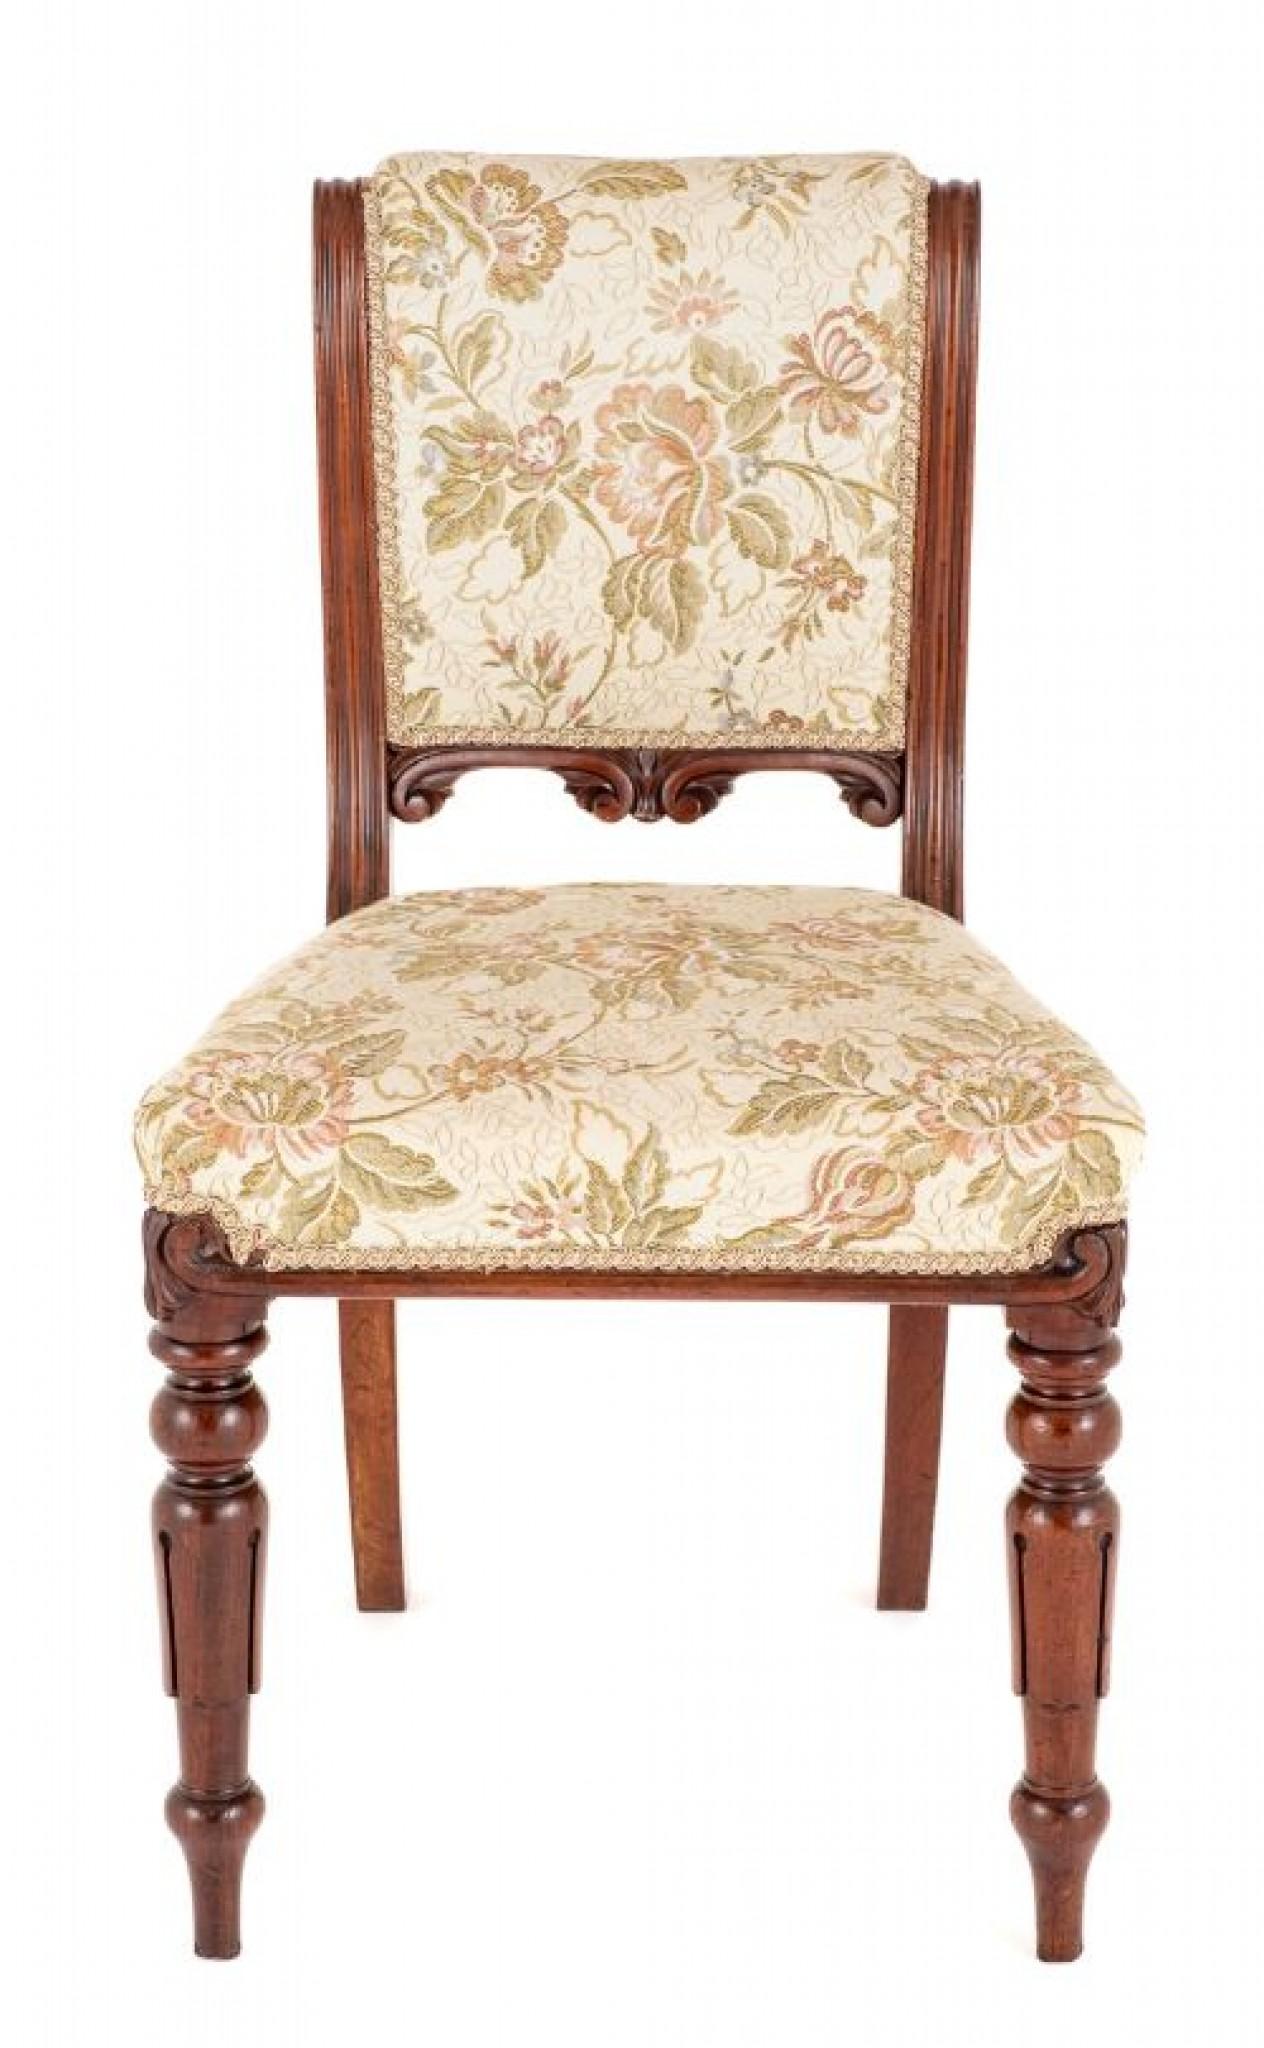 Set of 8 William IV Mahogany Dining Chairs.
19th Century
These Chairs are Raised Upon Typical William IV Turned and Carved Tulip Front Legs With Sabre Back Legs.
The Chairs Having a Stuff Over Seat and Back.
The Back Uprights Being of A Shaped and